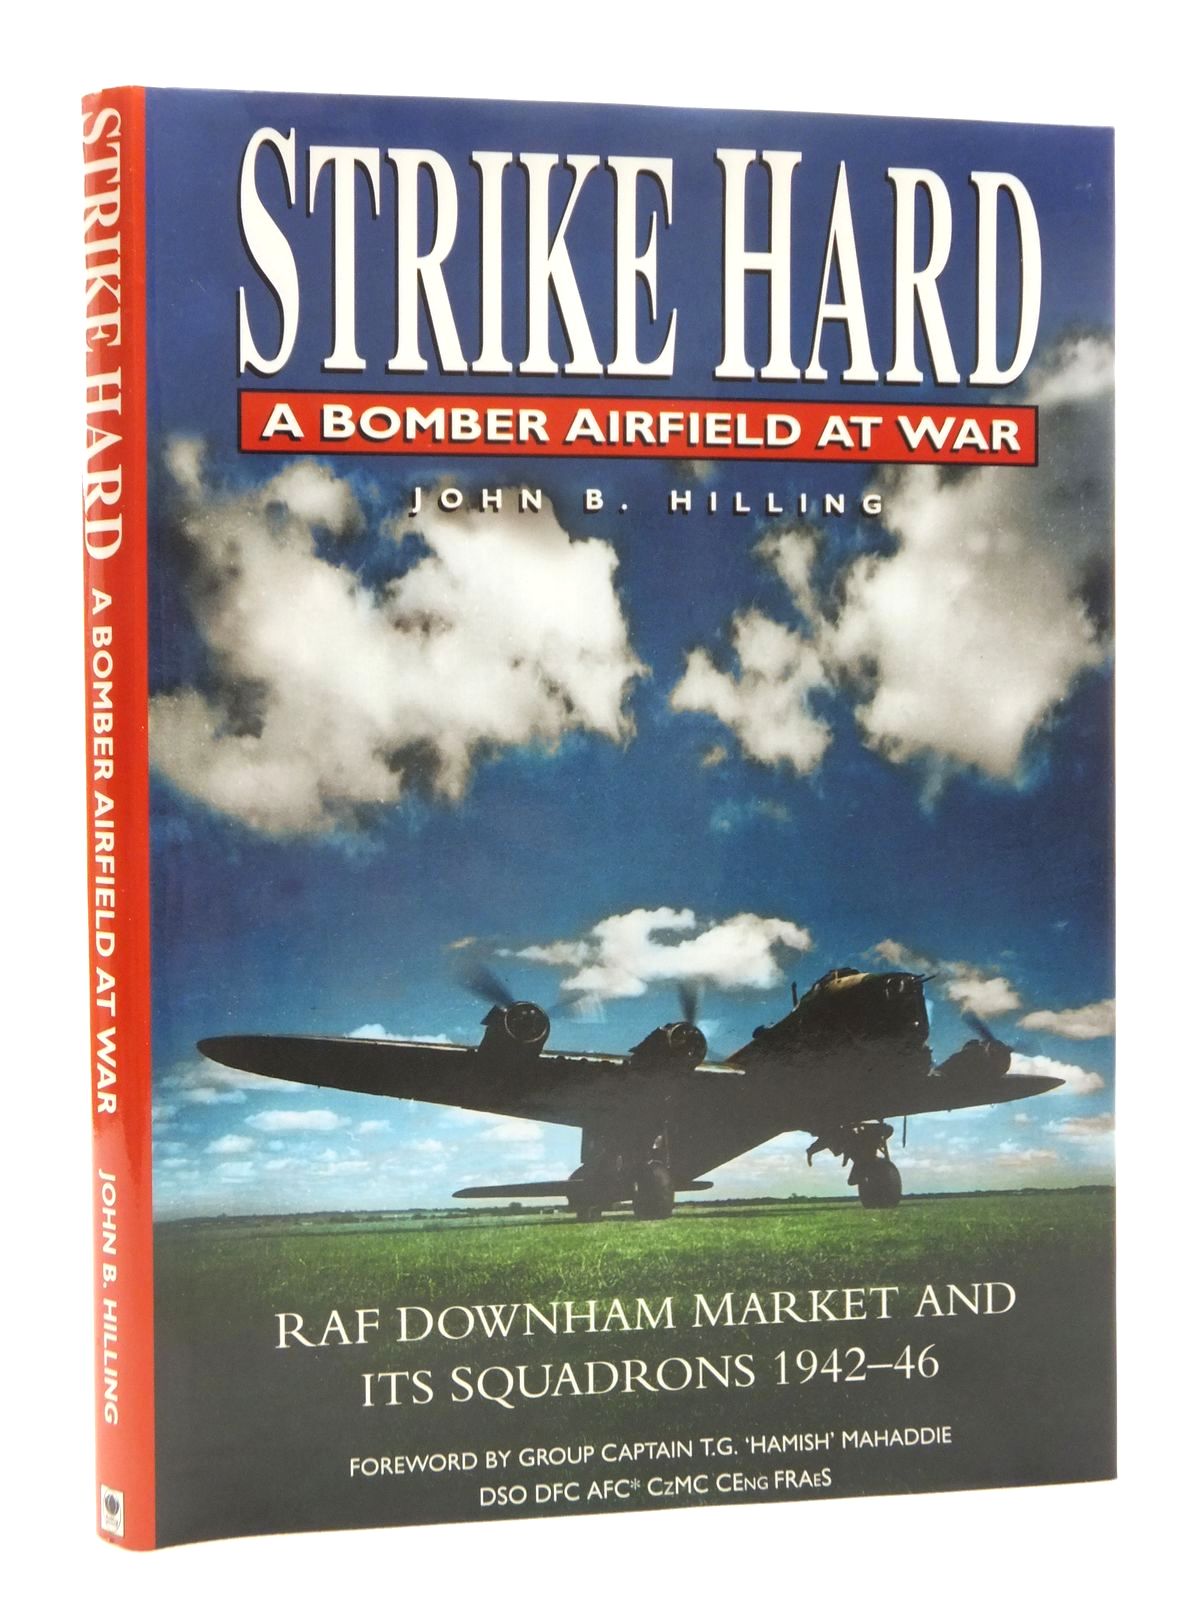 Photo of STRIKE HARD A BOMBER AIRFIELD AT WAR written by Hilling, John B. published by Budding Books (STOCK CODE: 1610082)  for sale by Stella & Rose's Books